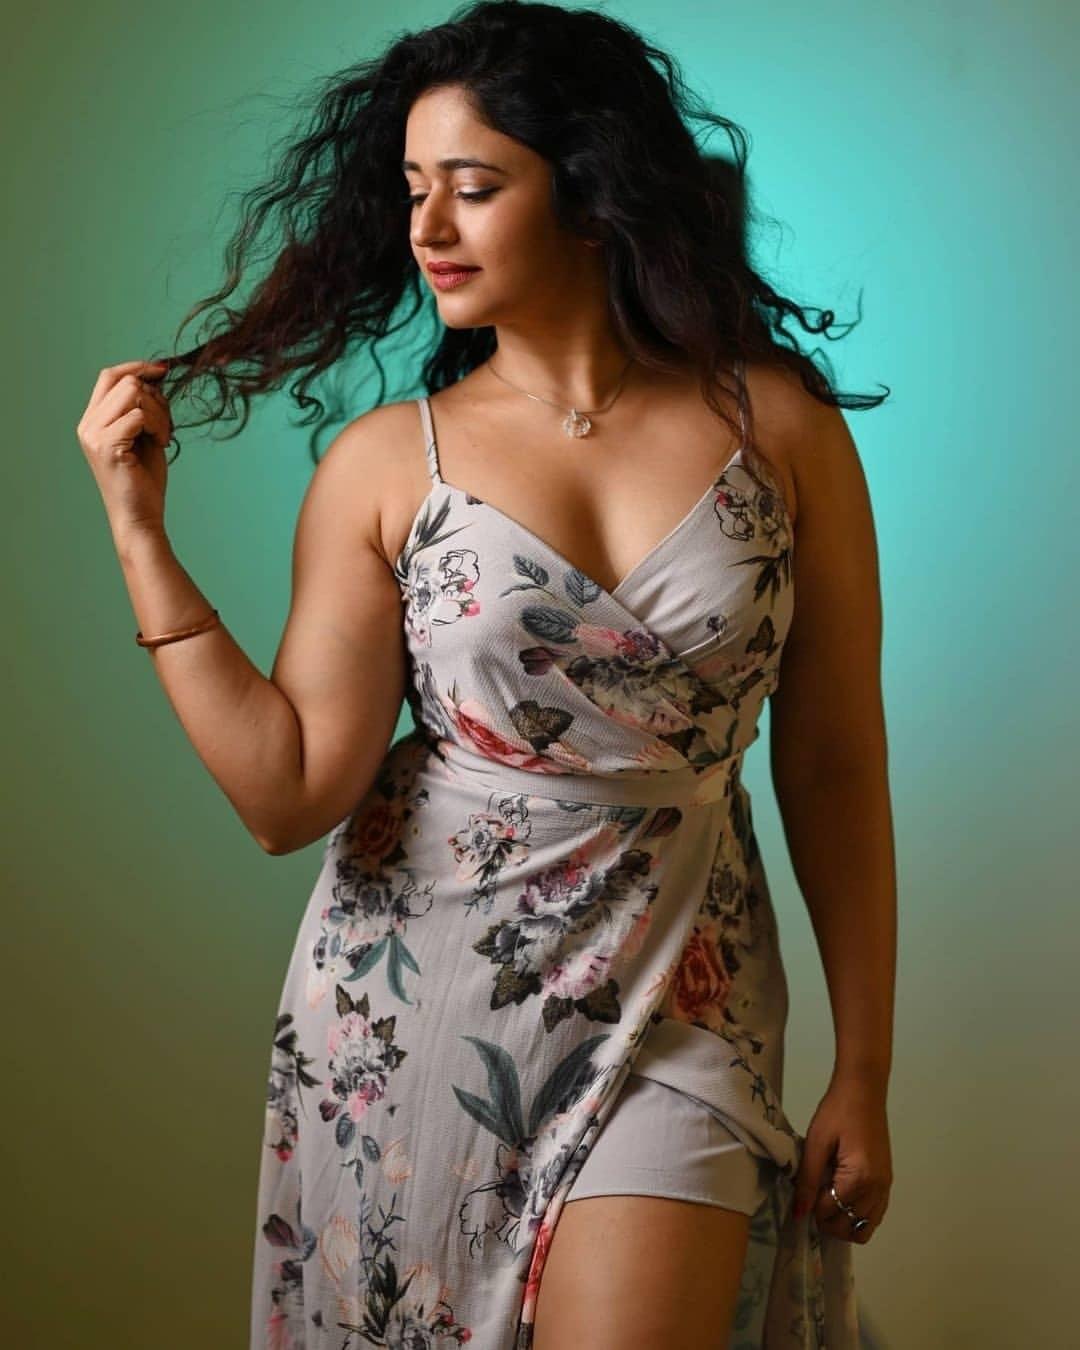 Poonam Bajwa Hot And Nude - South indian actress Poonam Bajwa exclusive hot and Sexy photos | Poonam  Bajwa latest hot and spicy photos gallery Photos: HD Images, Pictures,  Stills, First Look Posters of South indian actress Poonam